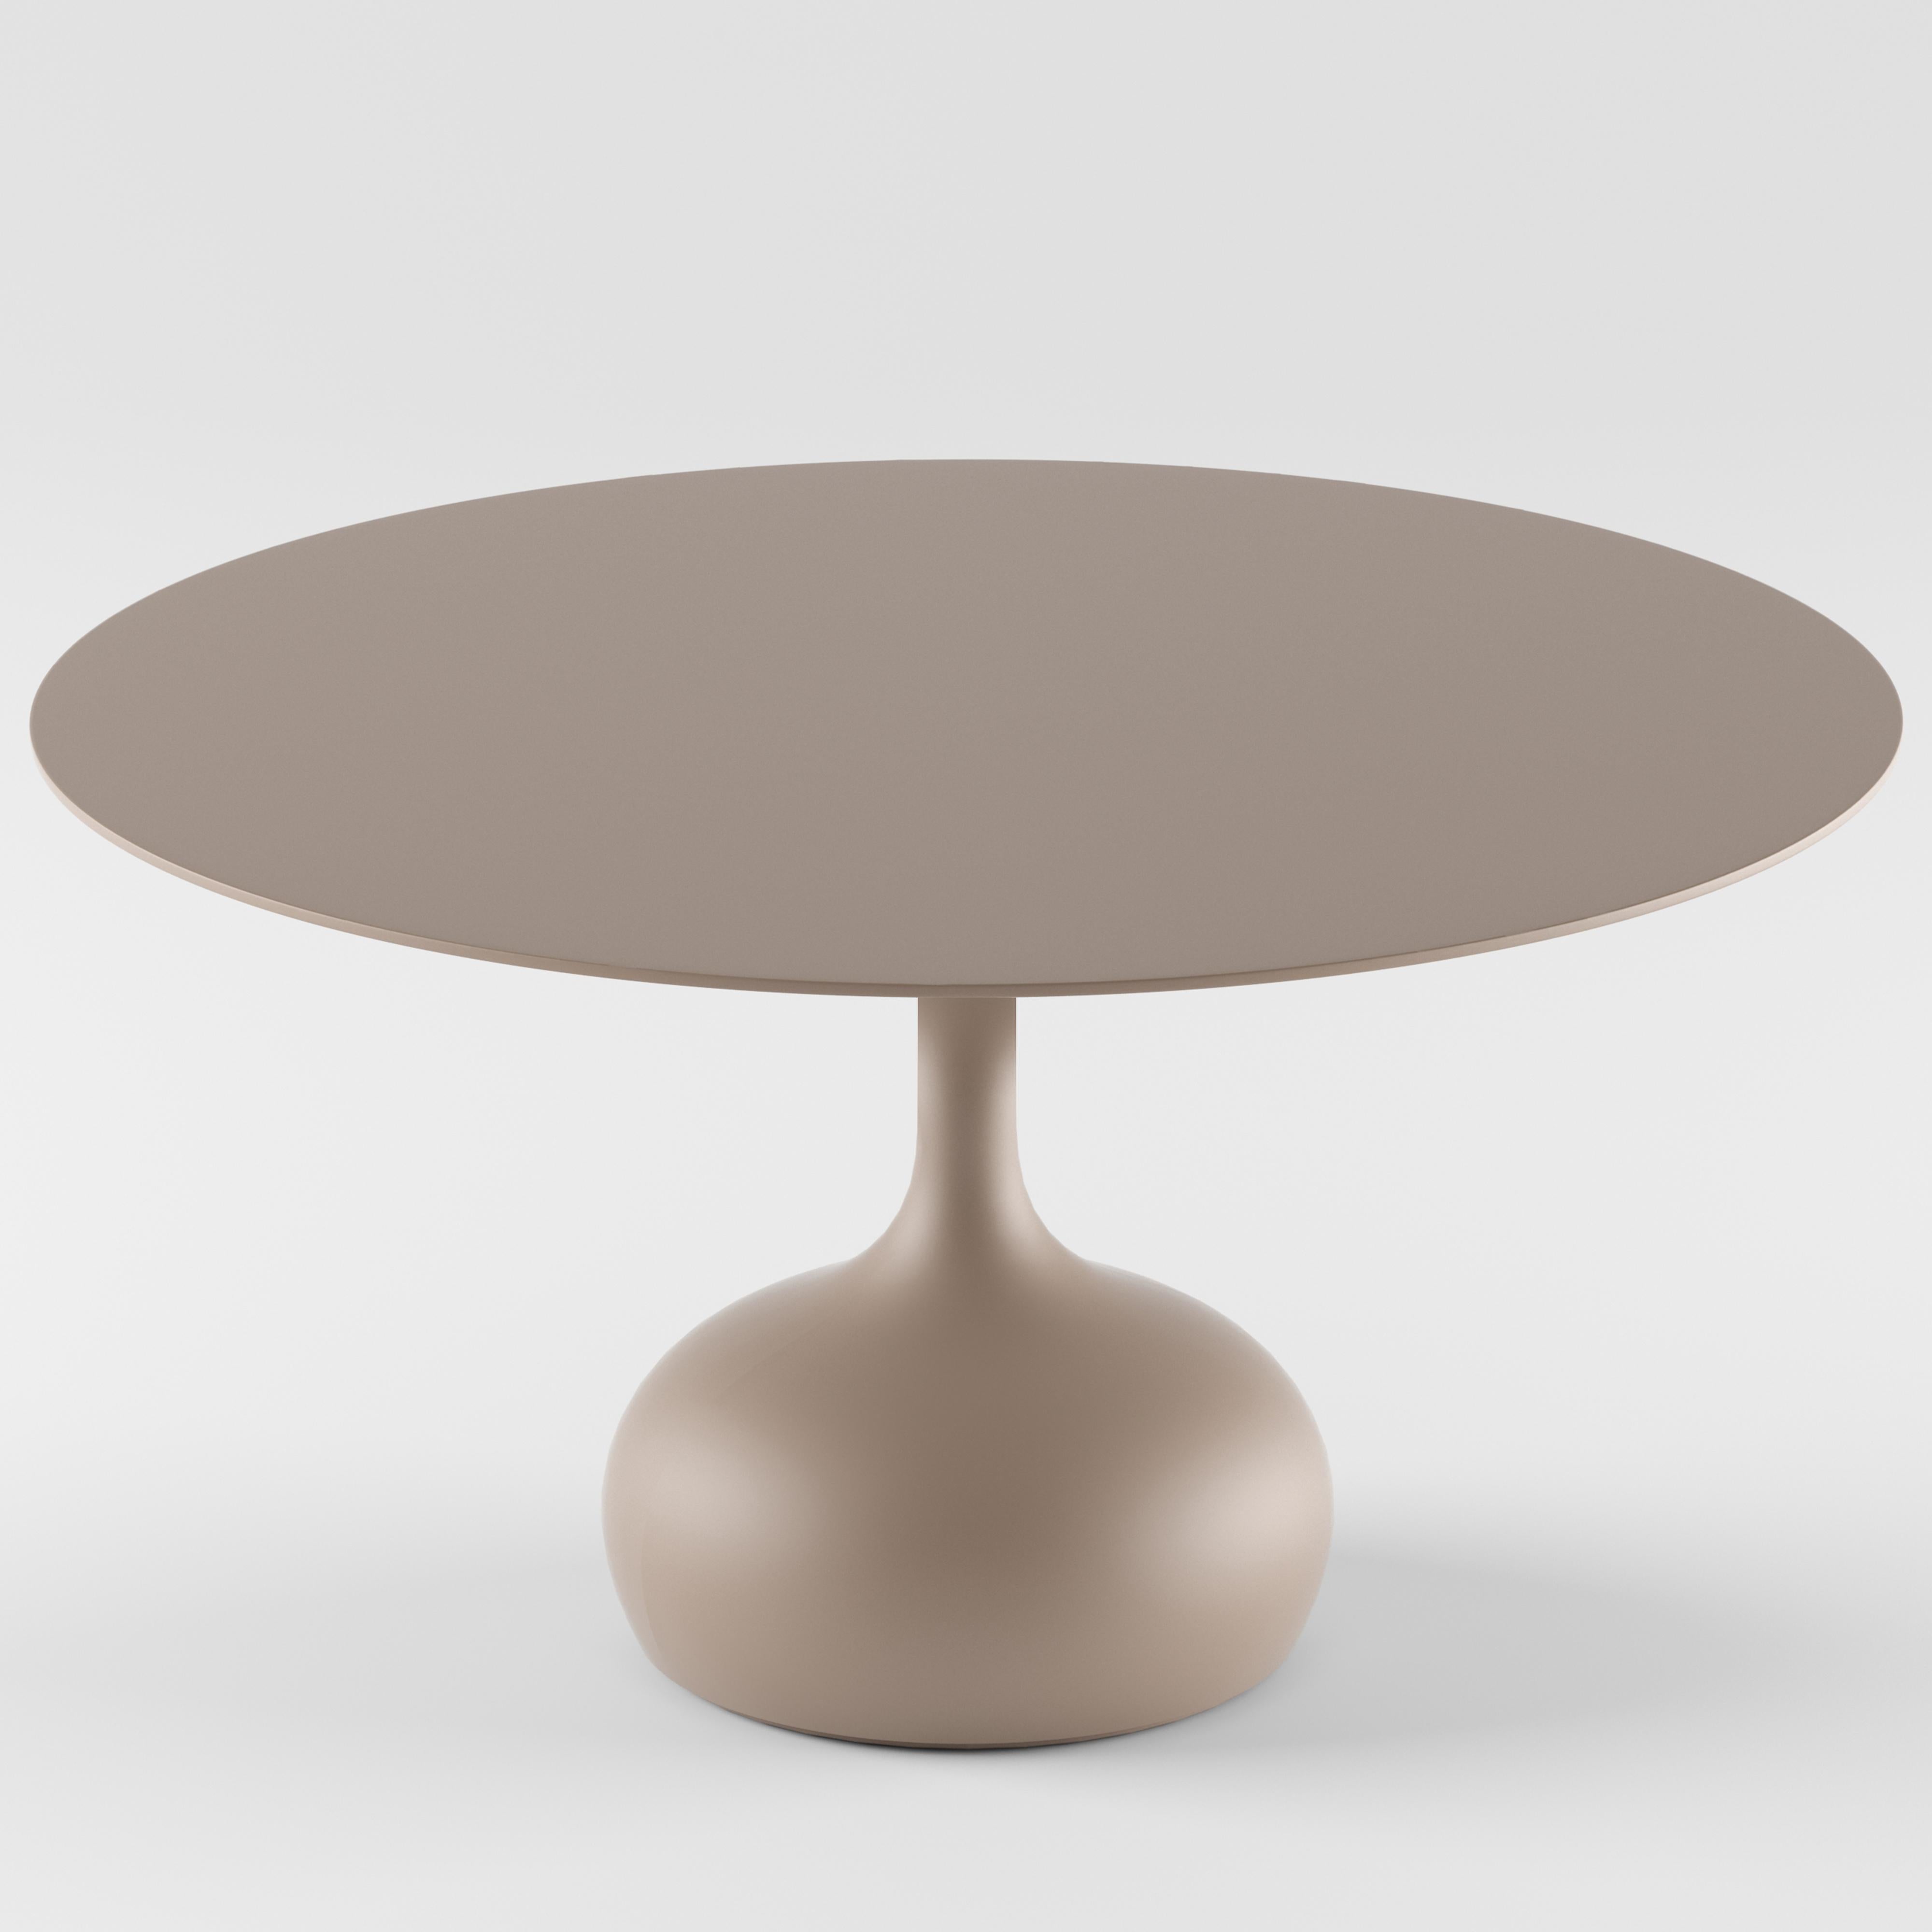 Alias 011 Saen Table Ø140 in Sand Lacquered MDF Top by Gabriele e Oscar Buratti

Table with ballasted base in lacquered polyurethane and round top in lacquered MDF.

The architects Gabriele and Oscar Buratti, members of the studyBuratti Architetti,